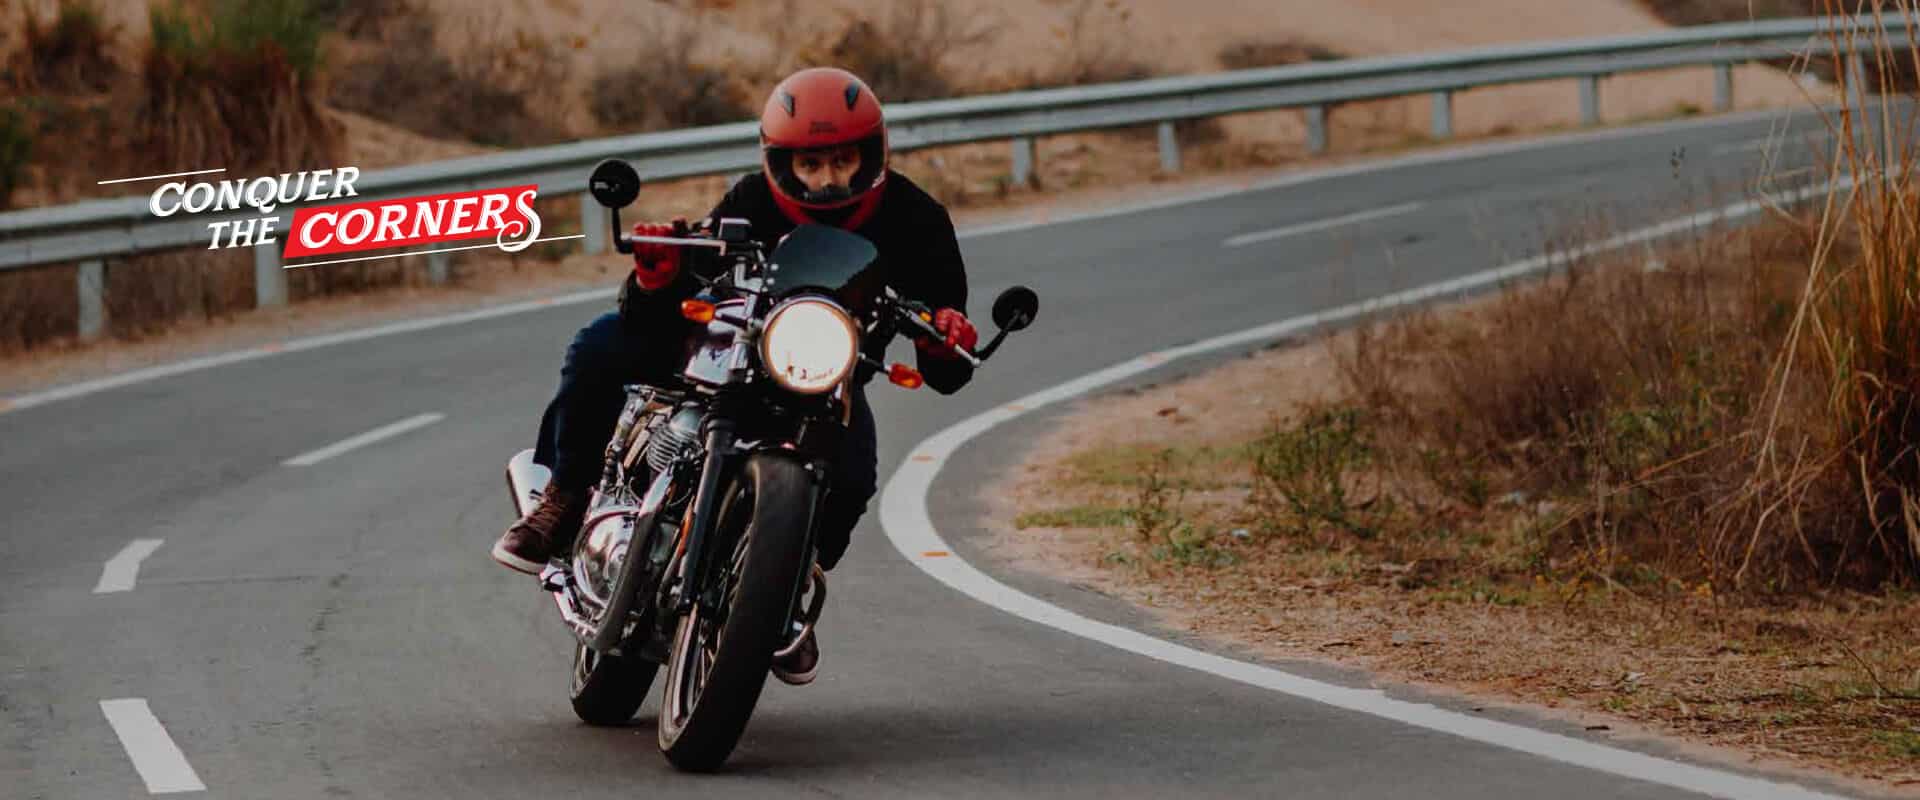 Conquering corners on the Royal Enfield Continental GT